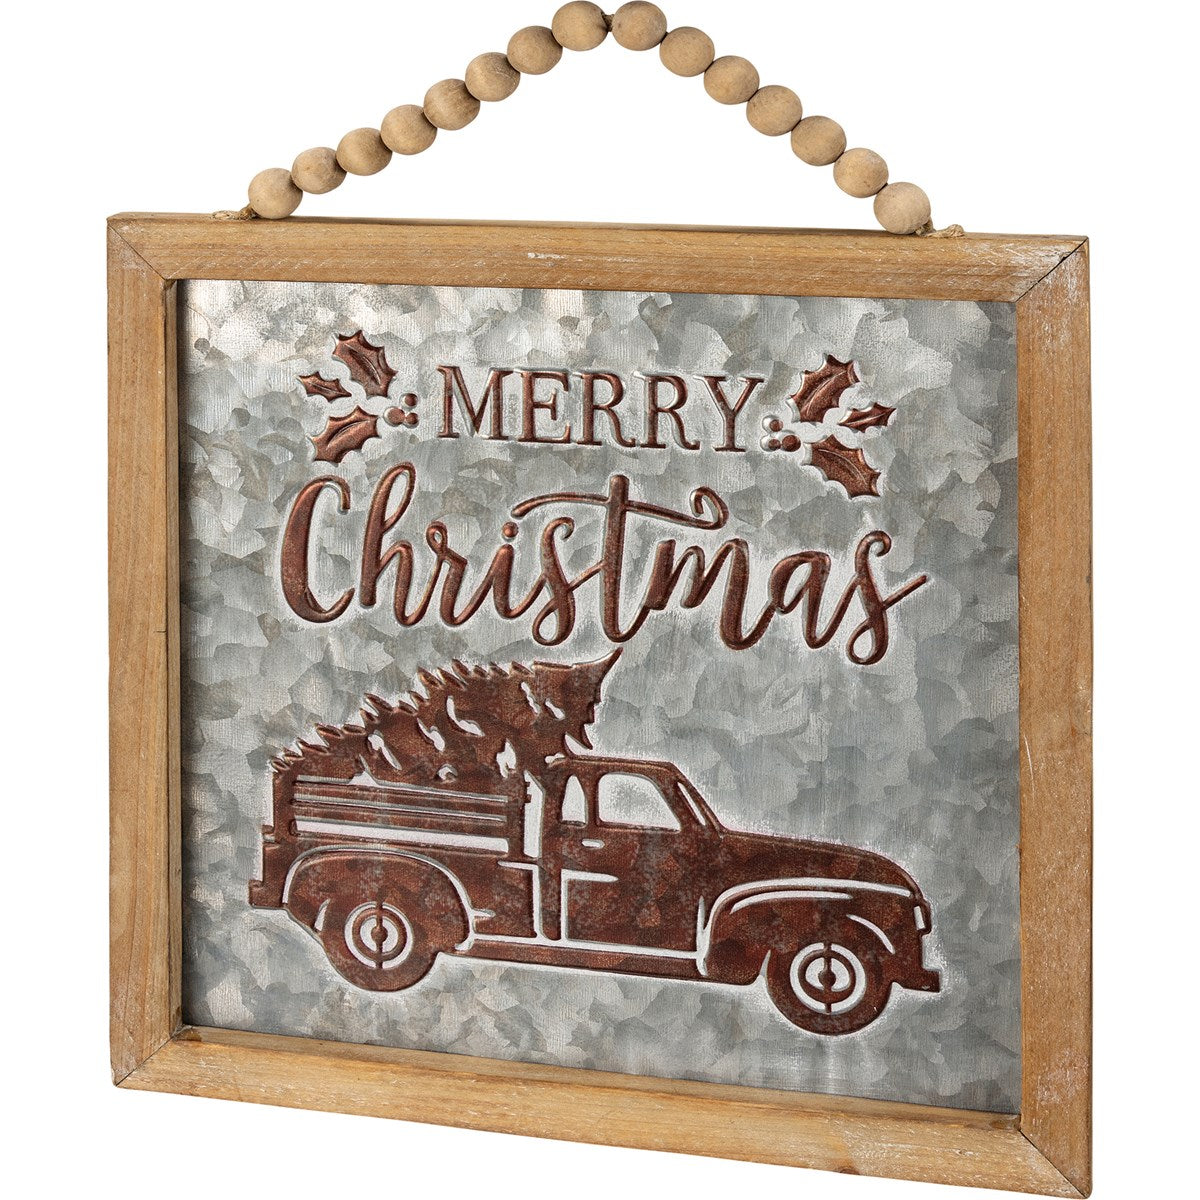 MERRY CHRISTMAS EMBOSSED WALL DECOR